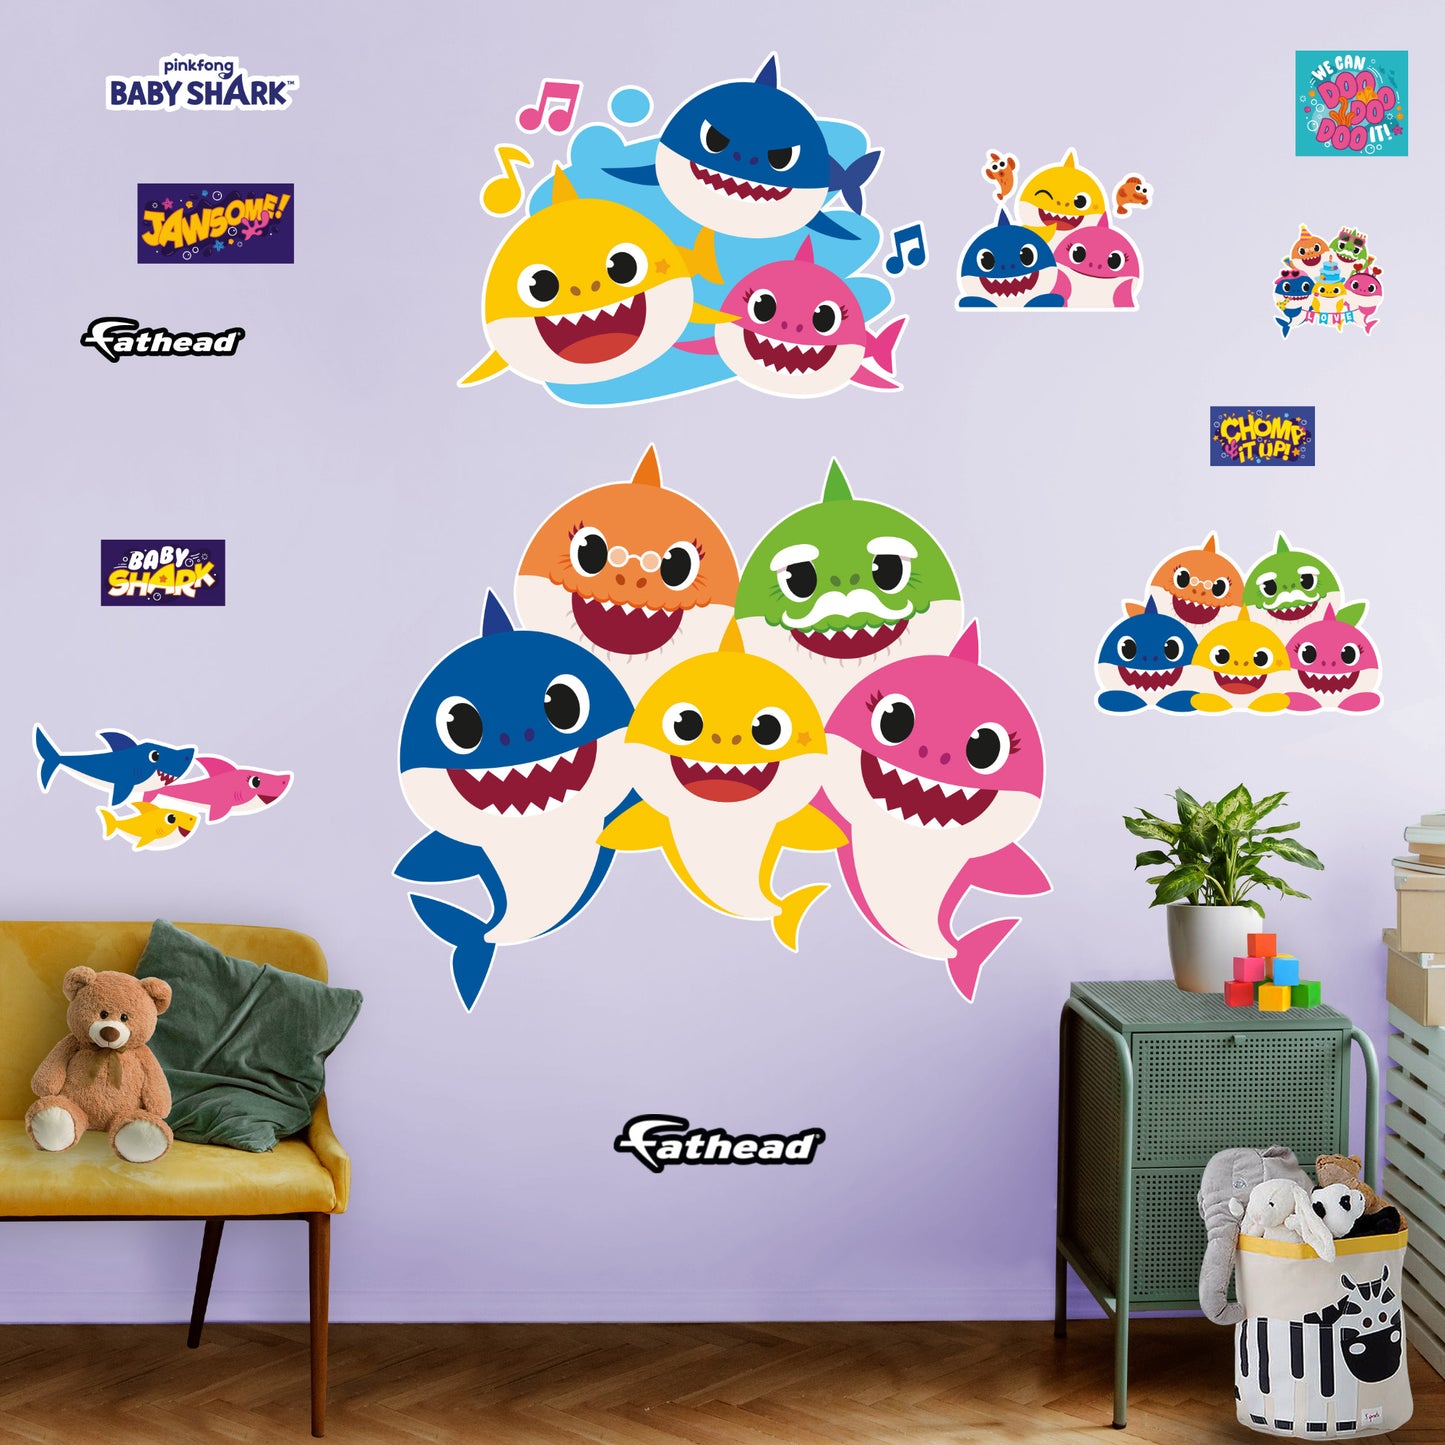 Baby Shark Family Wall Decals - Baby Shark Wall Decals with 3D Augmented Reality Interaction - Baby Shark Room Decor